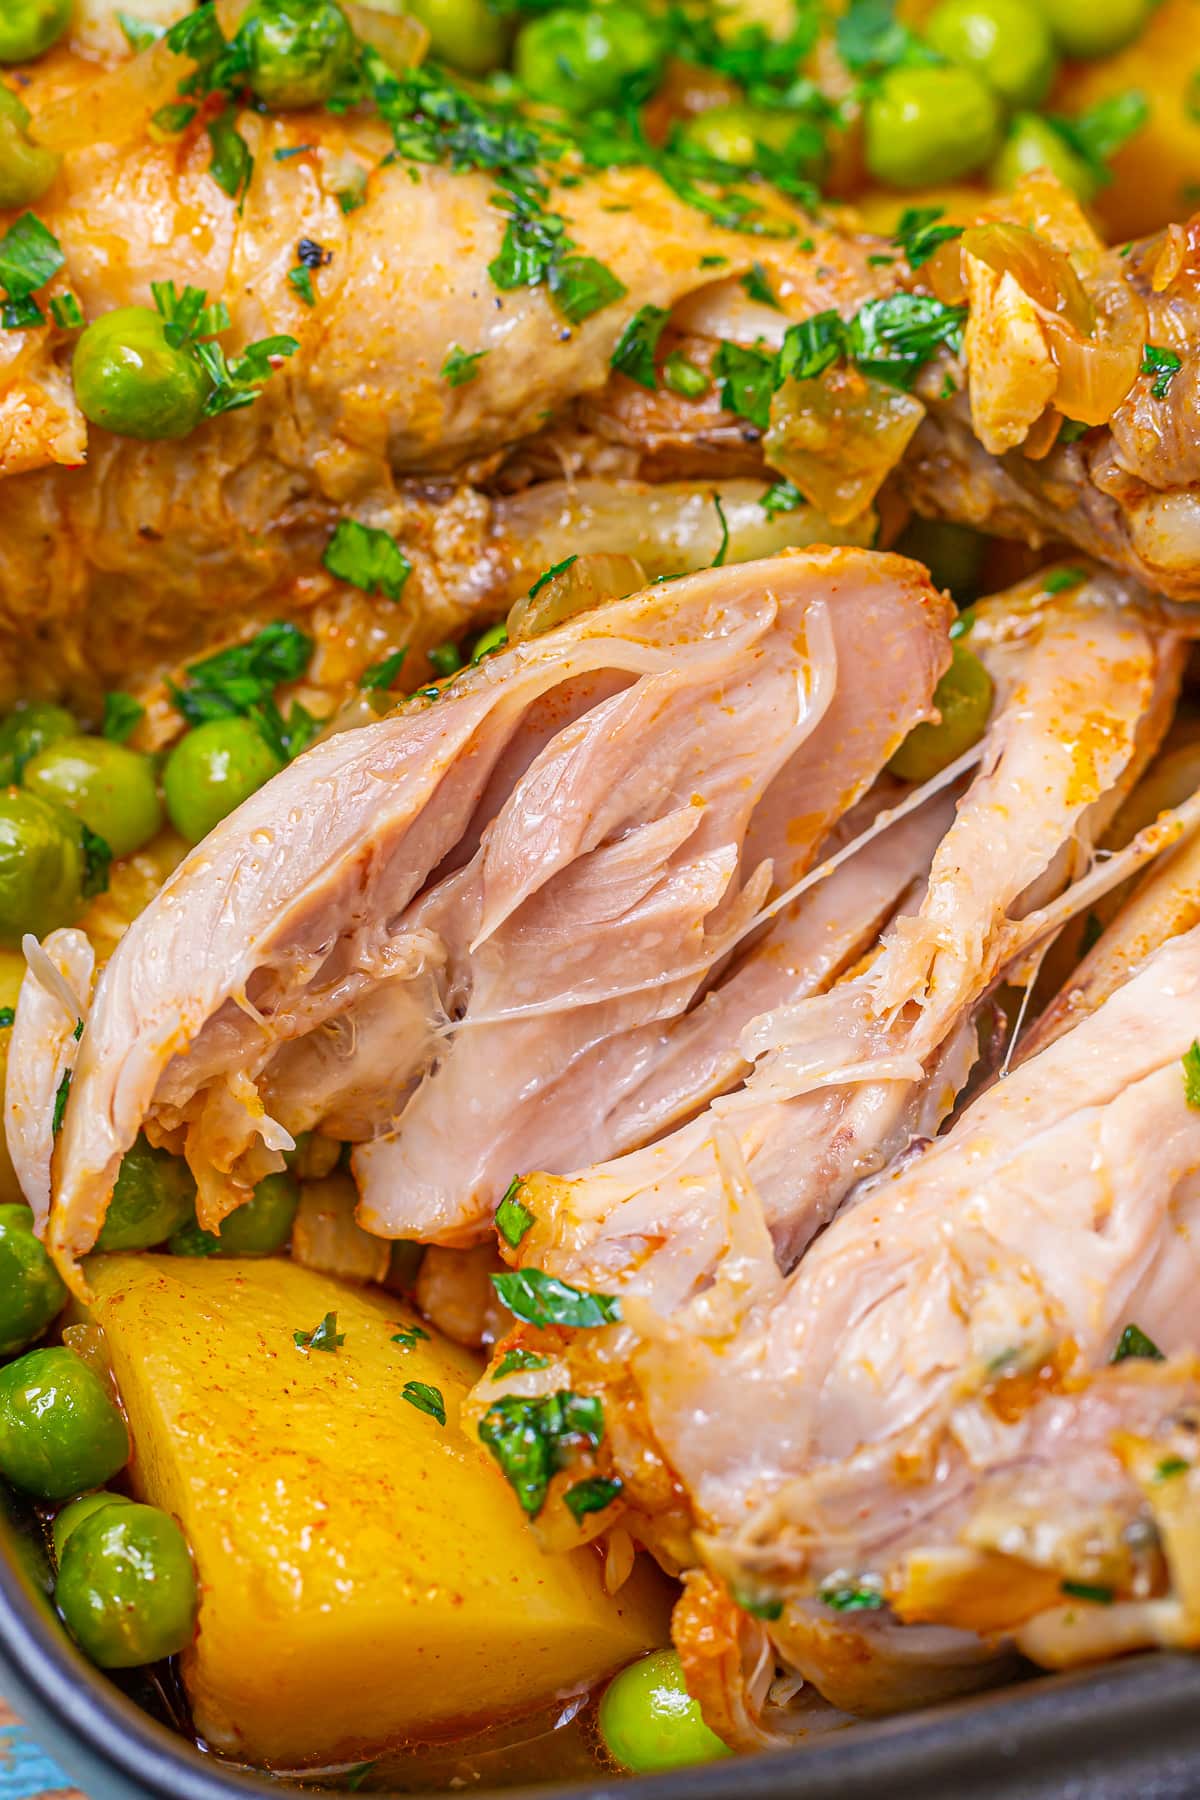 A close-up showing the texture and juiciness of the chicken stew, highlighting the succulent pieces of chicken, vibrant green peas, and yellow potatoes.